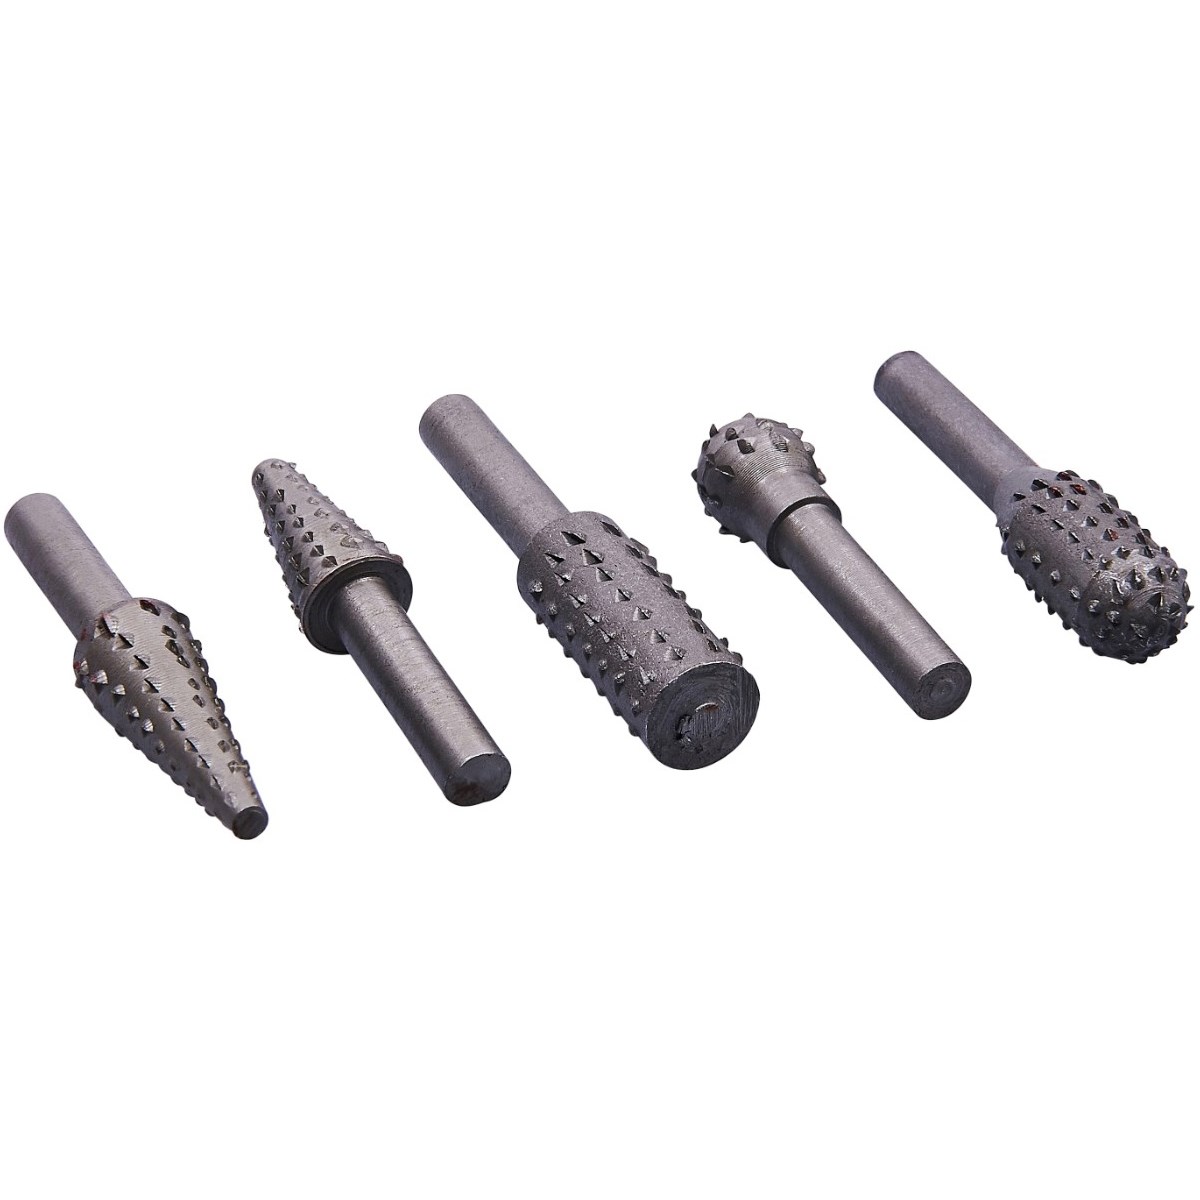 5Pc ROTARY RASP SET 6mm Shank Oval Cylinder Cone Small Wood Shaping Carving Bit 